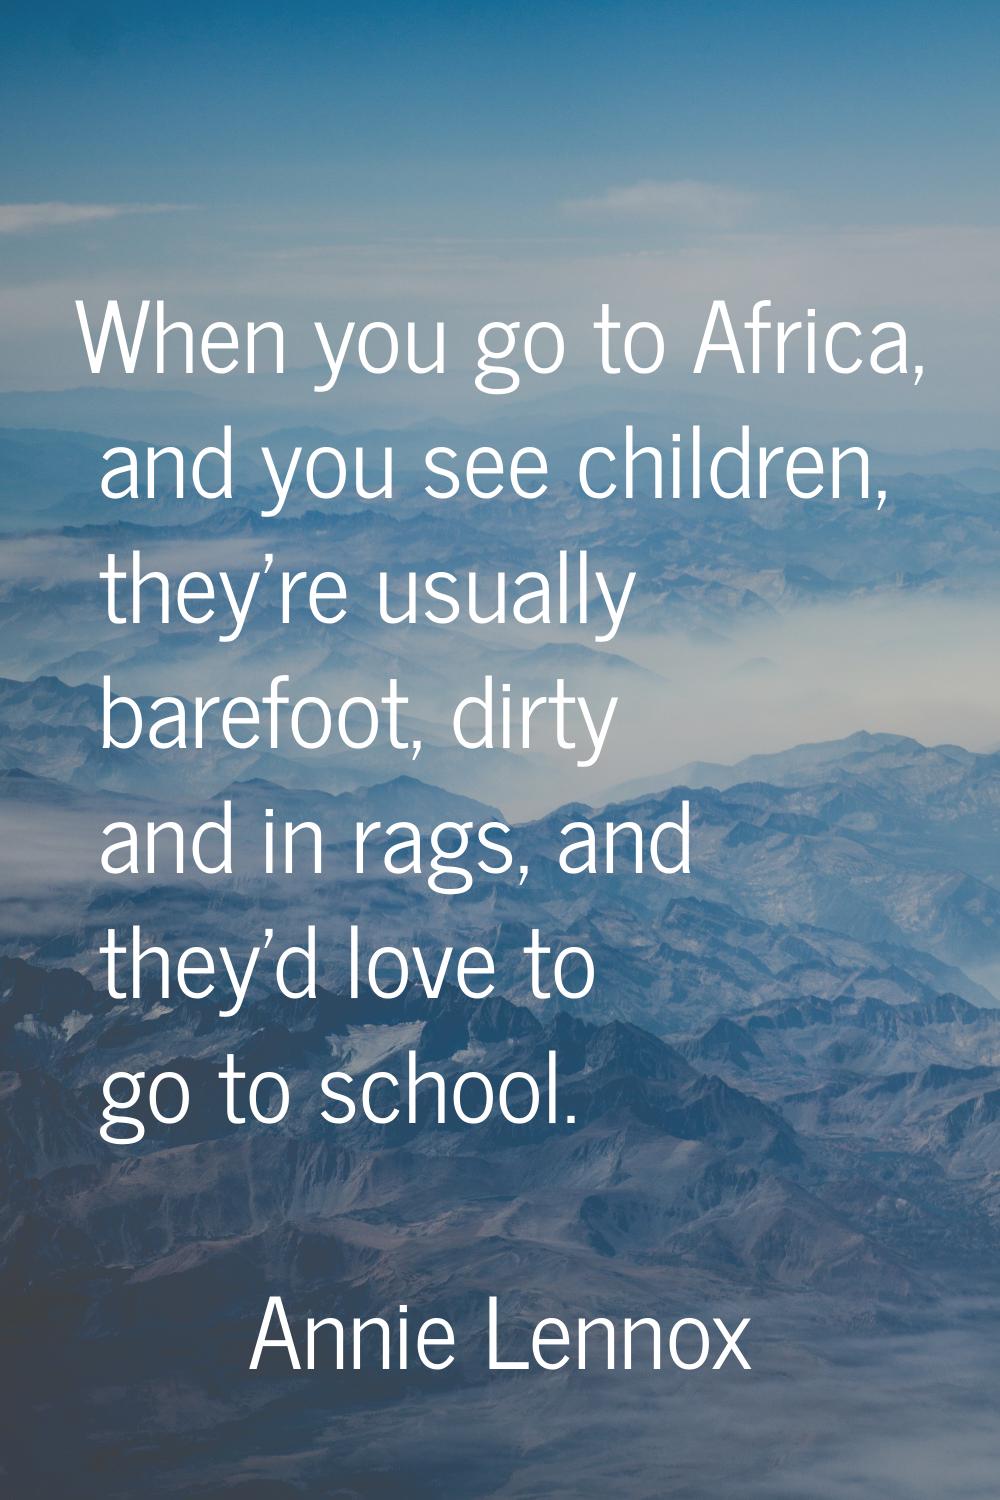 When you go to Africa, and you see children, they're usually barefoot, dirty and in rags, and they'